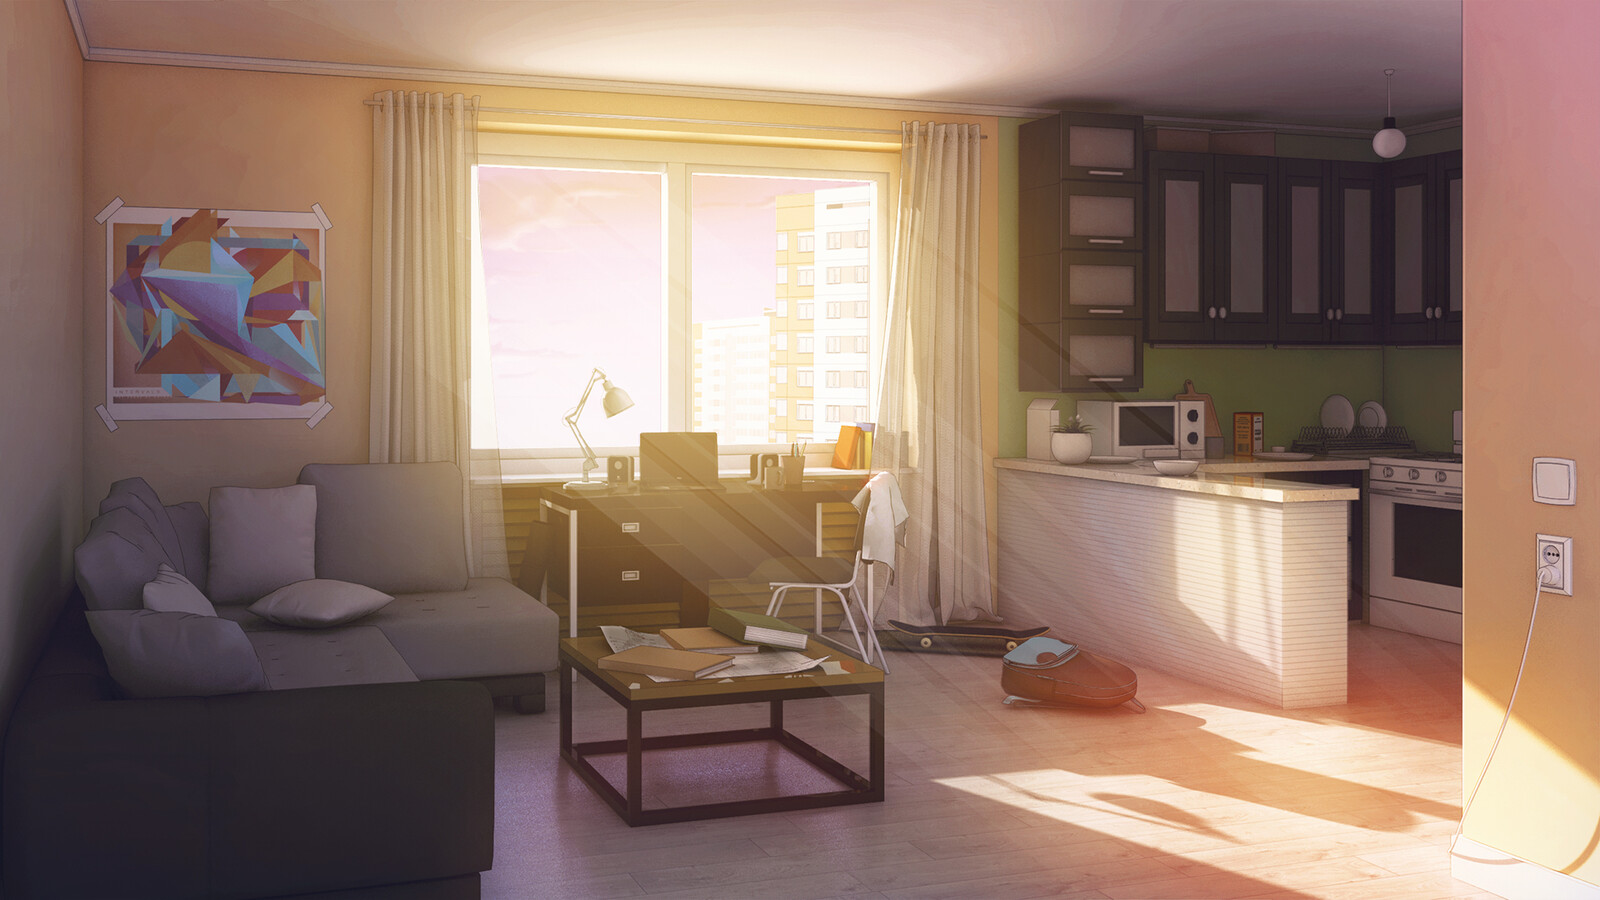 Room of the main character in first ep. of visual novel Young Hearts. Evening light